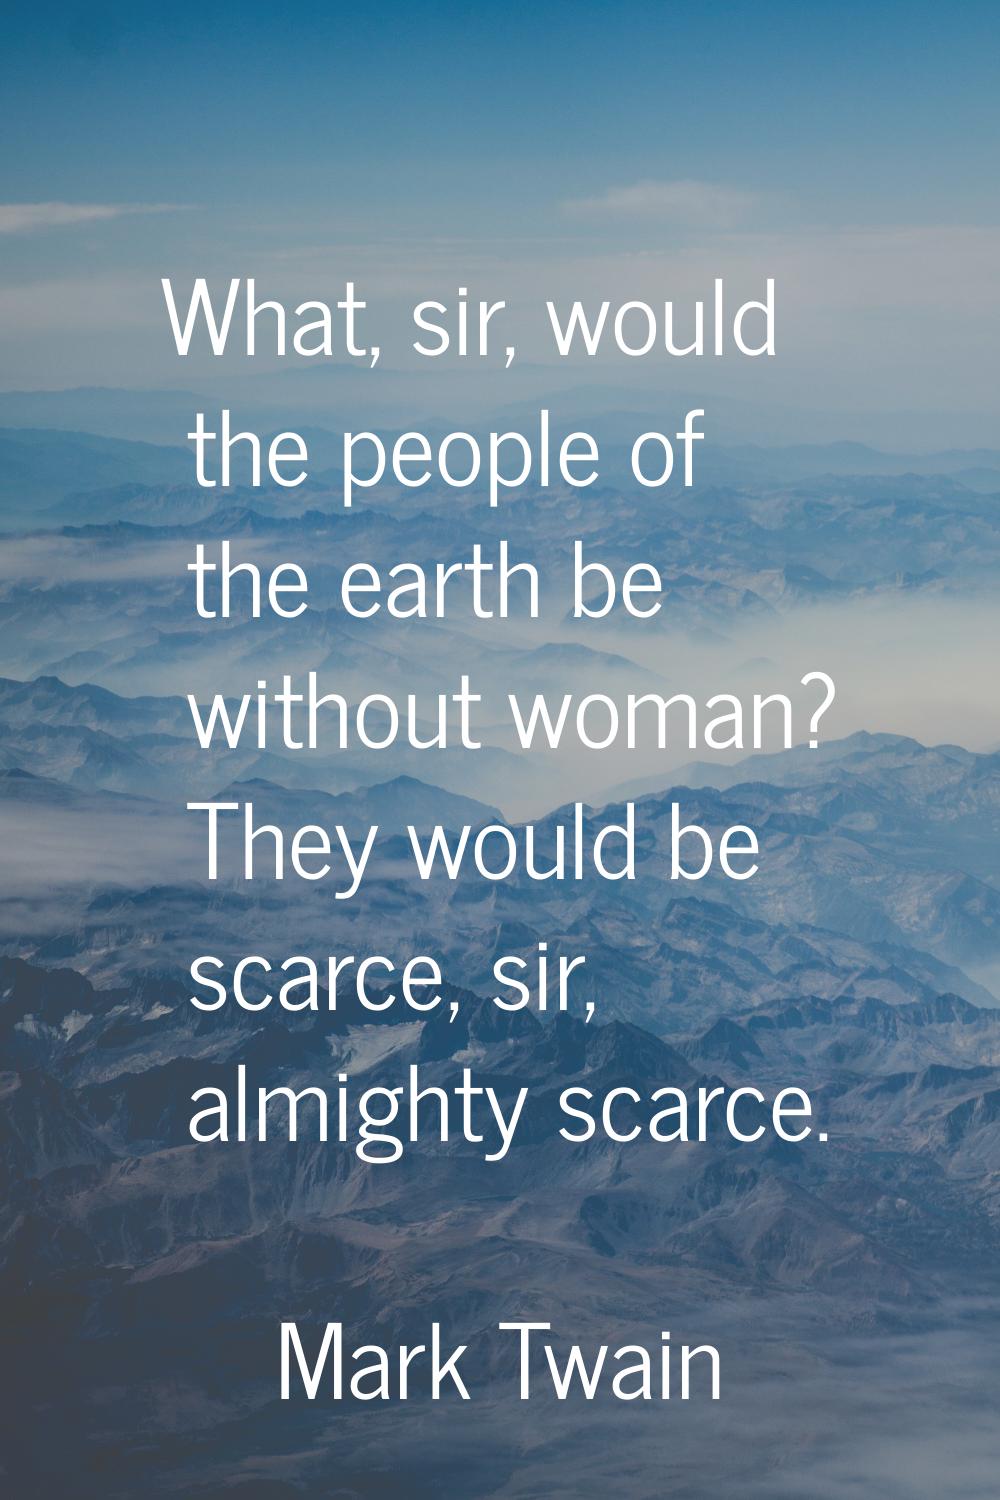 What, sir, would the people of the earth be without woman? They would be scarce, sir, almighty scar